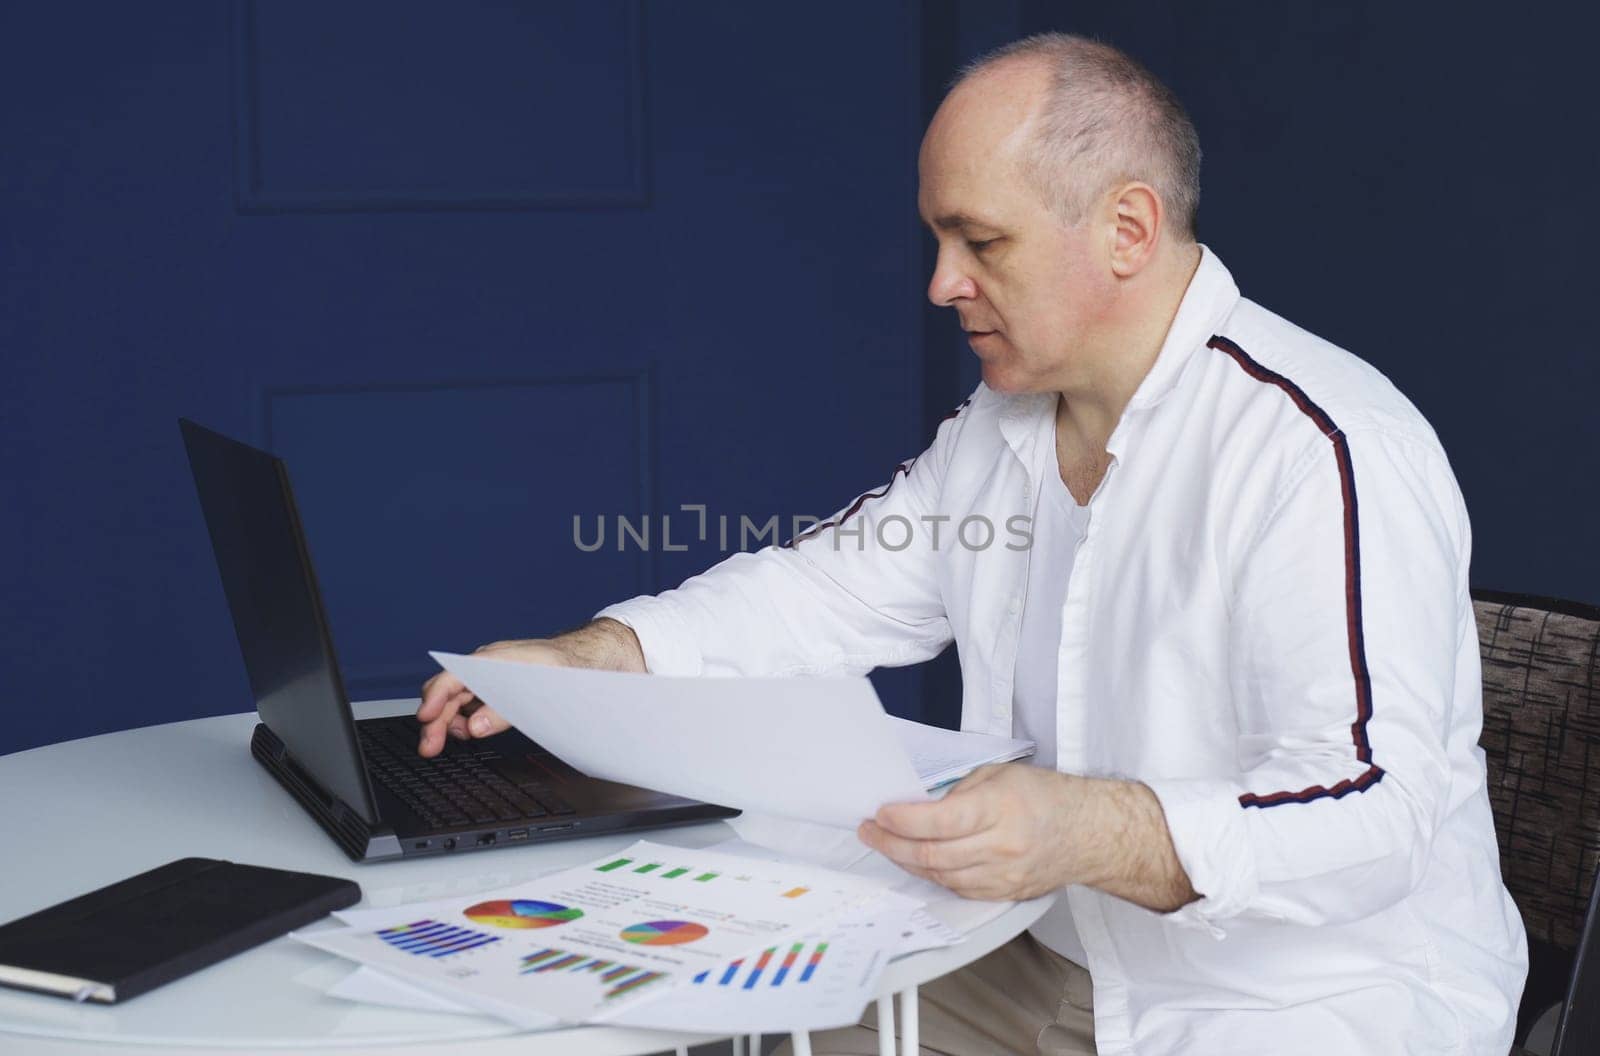 A male businessman works on a laptop, studies reporting documents, charts and graphs.